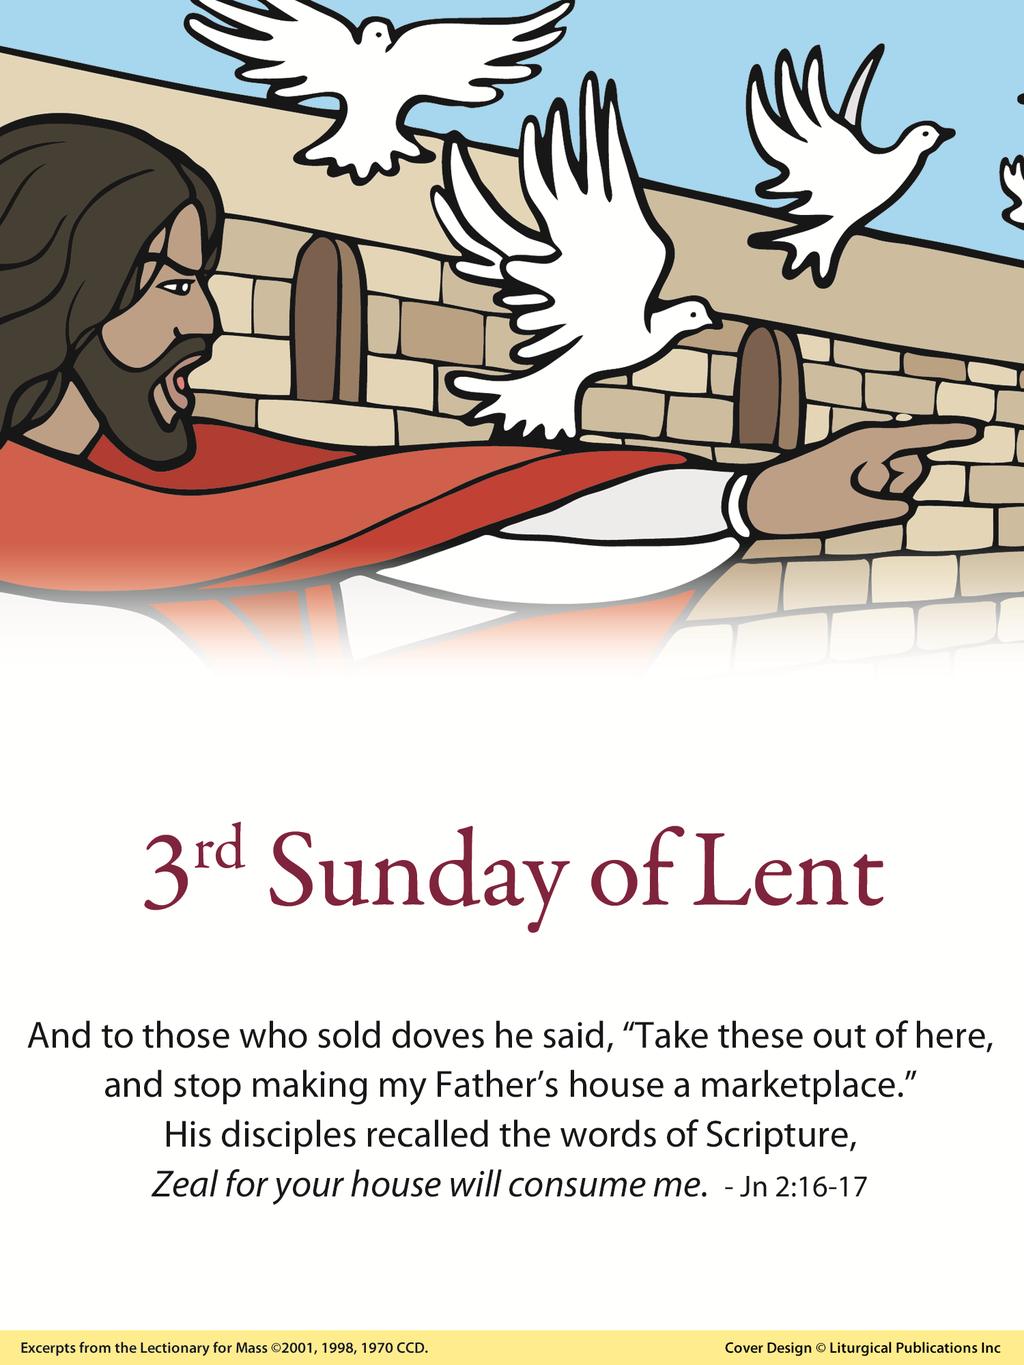 March 8, 2015 GUIDELINES FOR LENT The time of Lent is to be observed by Catholics as a special season of prayer, penance and works of charity.